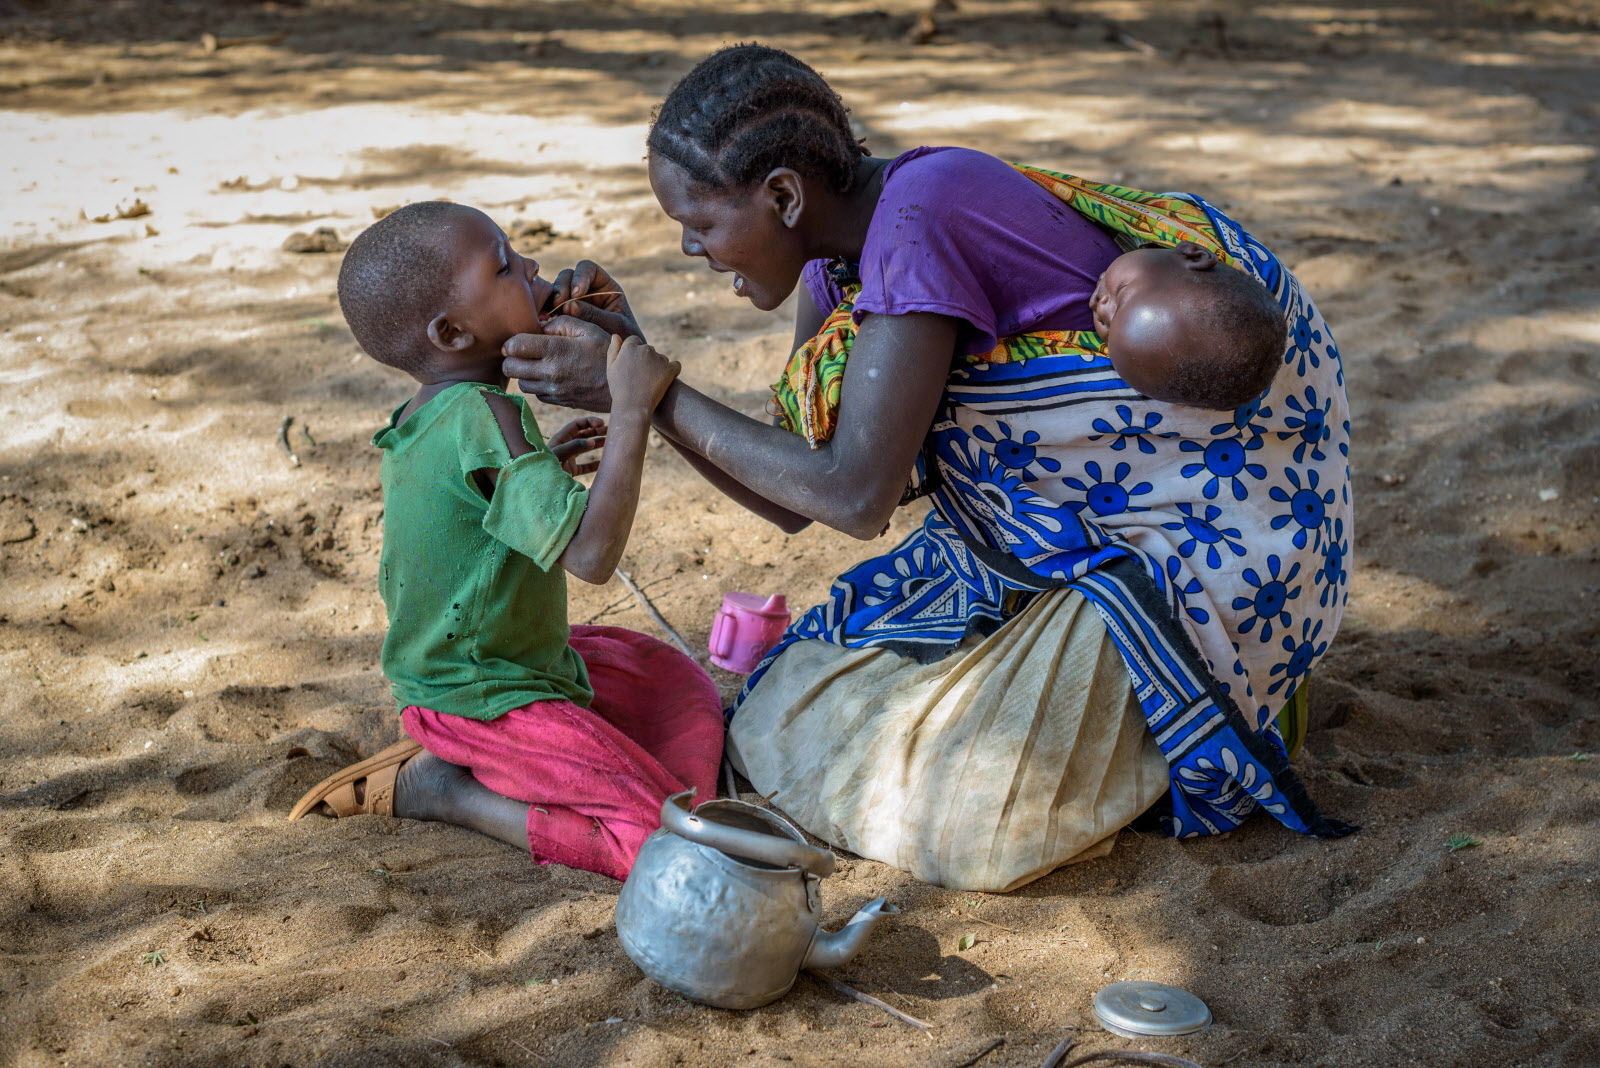 Monica uses a twig to clean Cheru’s teeth in a break from their long walk for water.